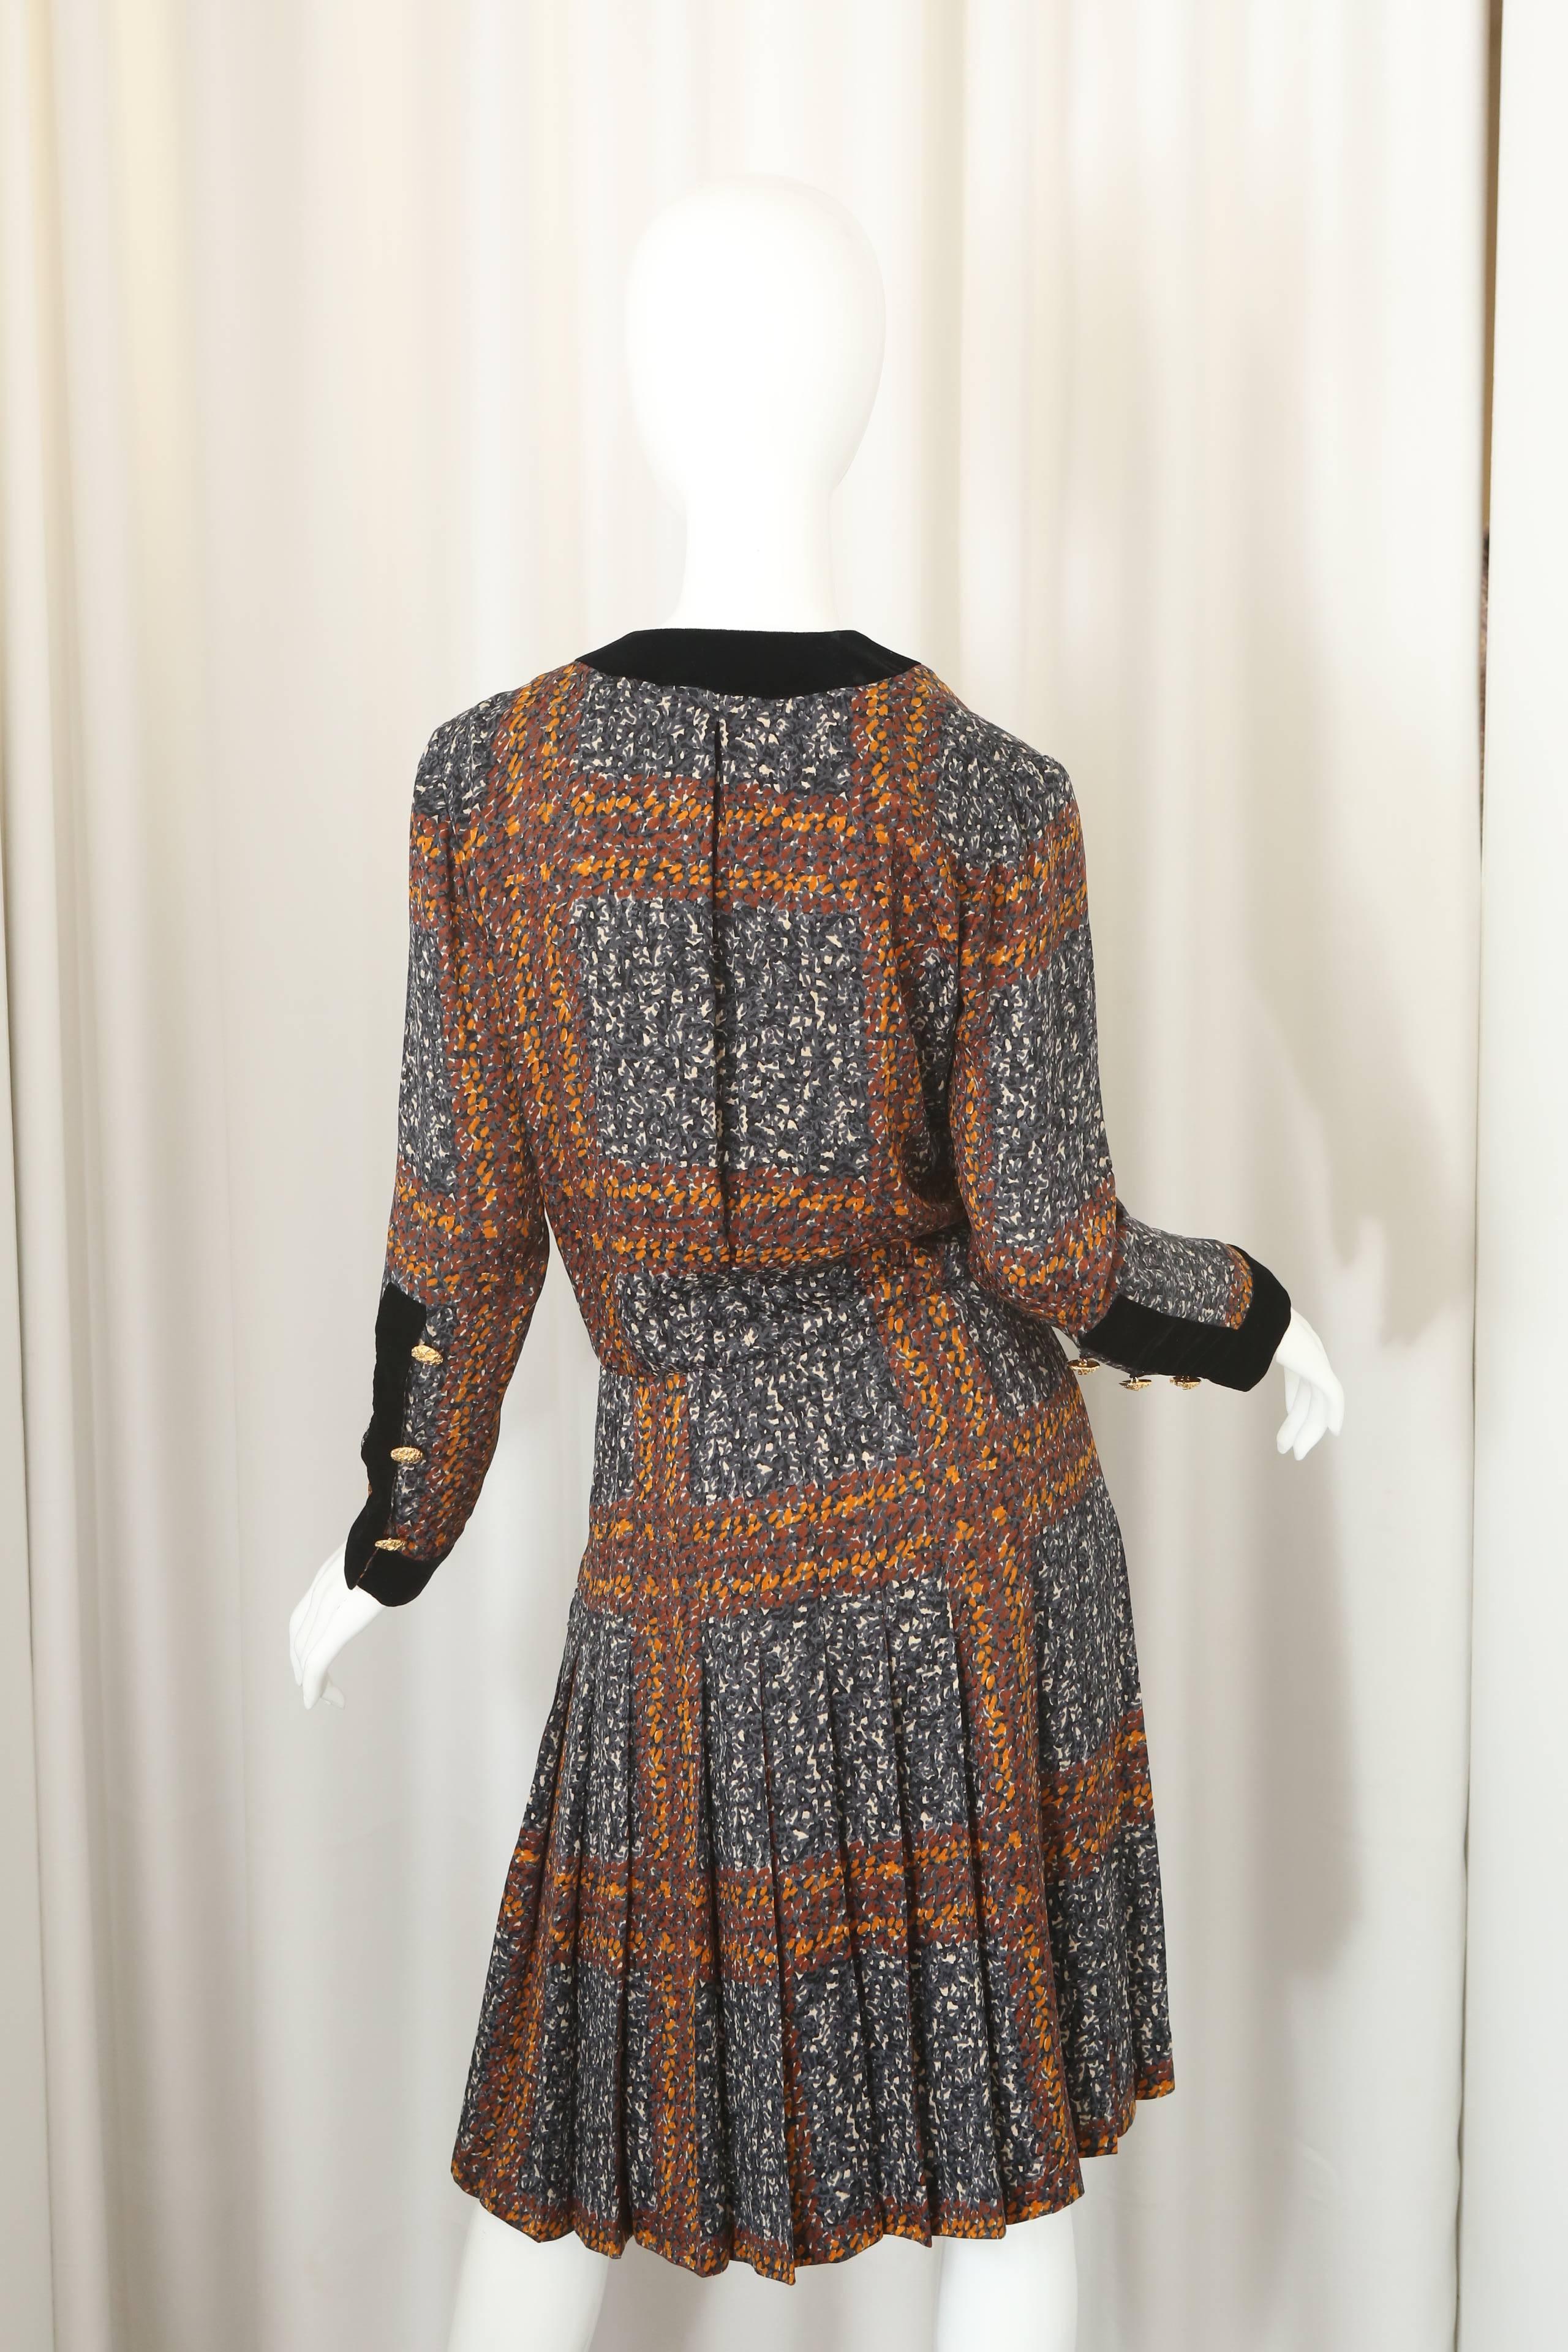 Givenchy Long Sleeve Printed Dress W/ Black Velvet & Gold Buttons 1